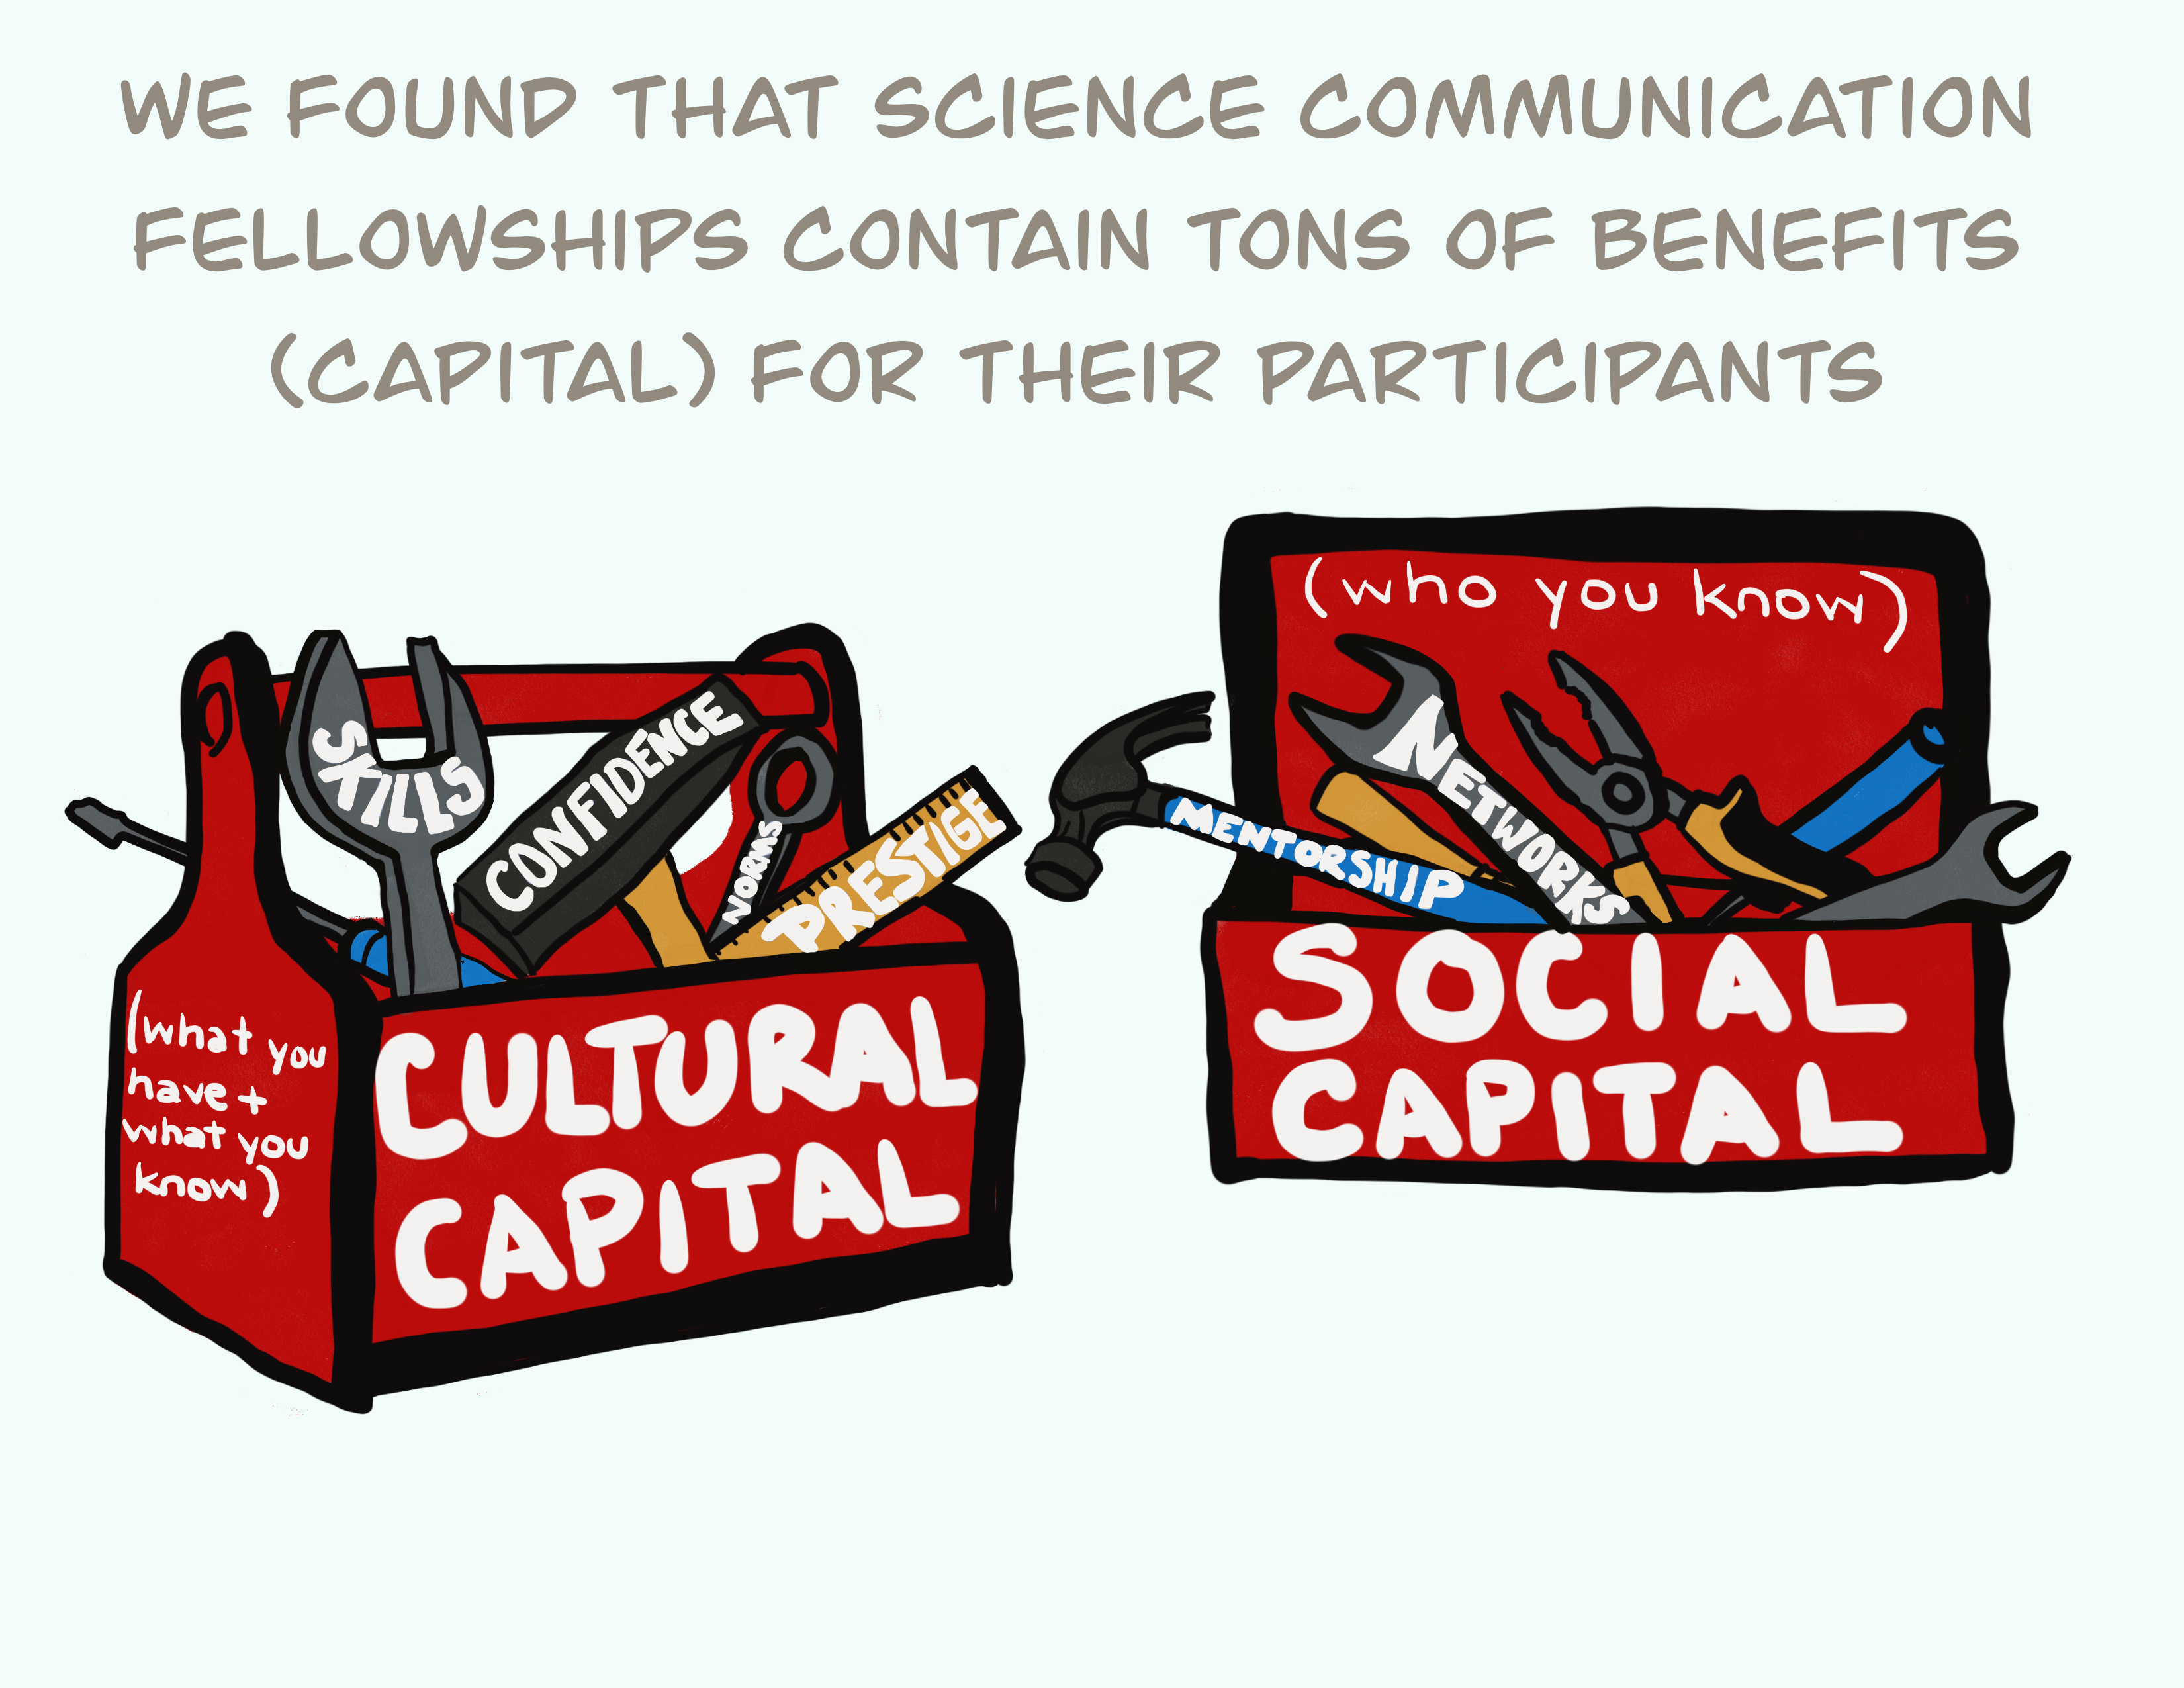 We found that science communication fellowships contain tons of benefits for their participants. Cultural capital: what you have and what you know - skills, confidence, norms, prestige. Social capital: who you know - mentorship, networks.